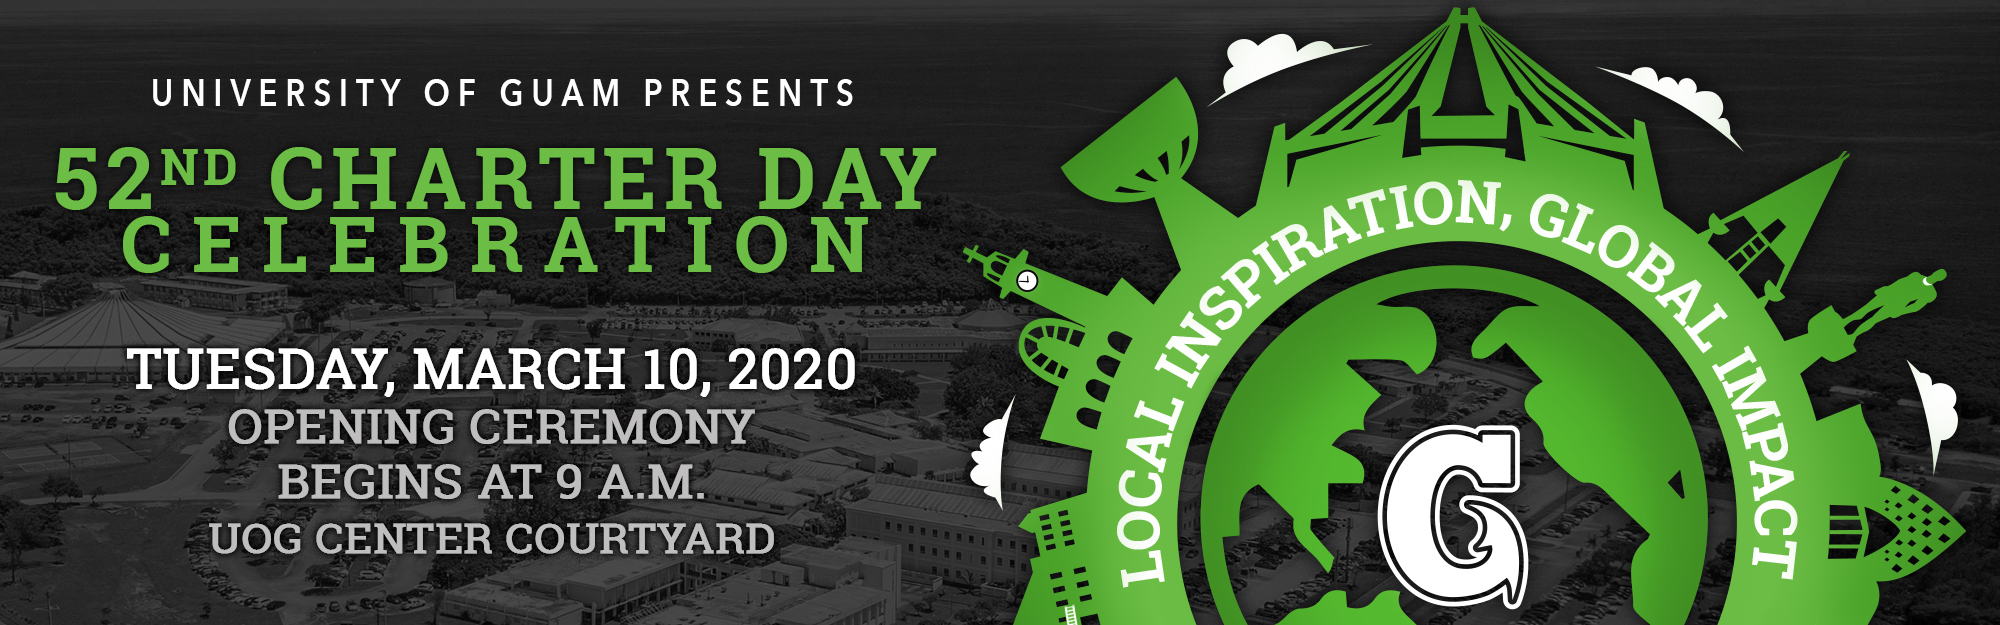 2020 Charter Day Banner